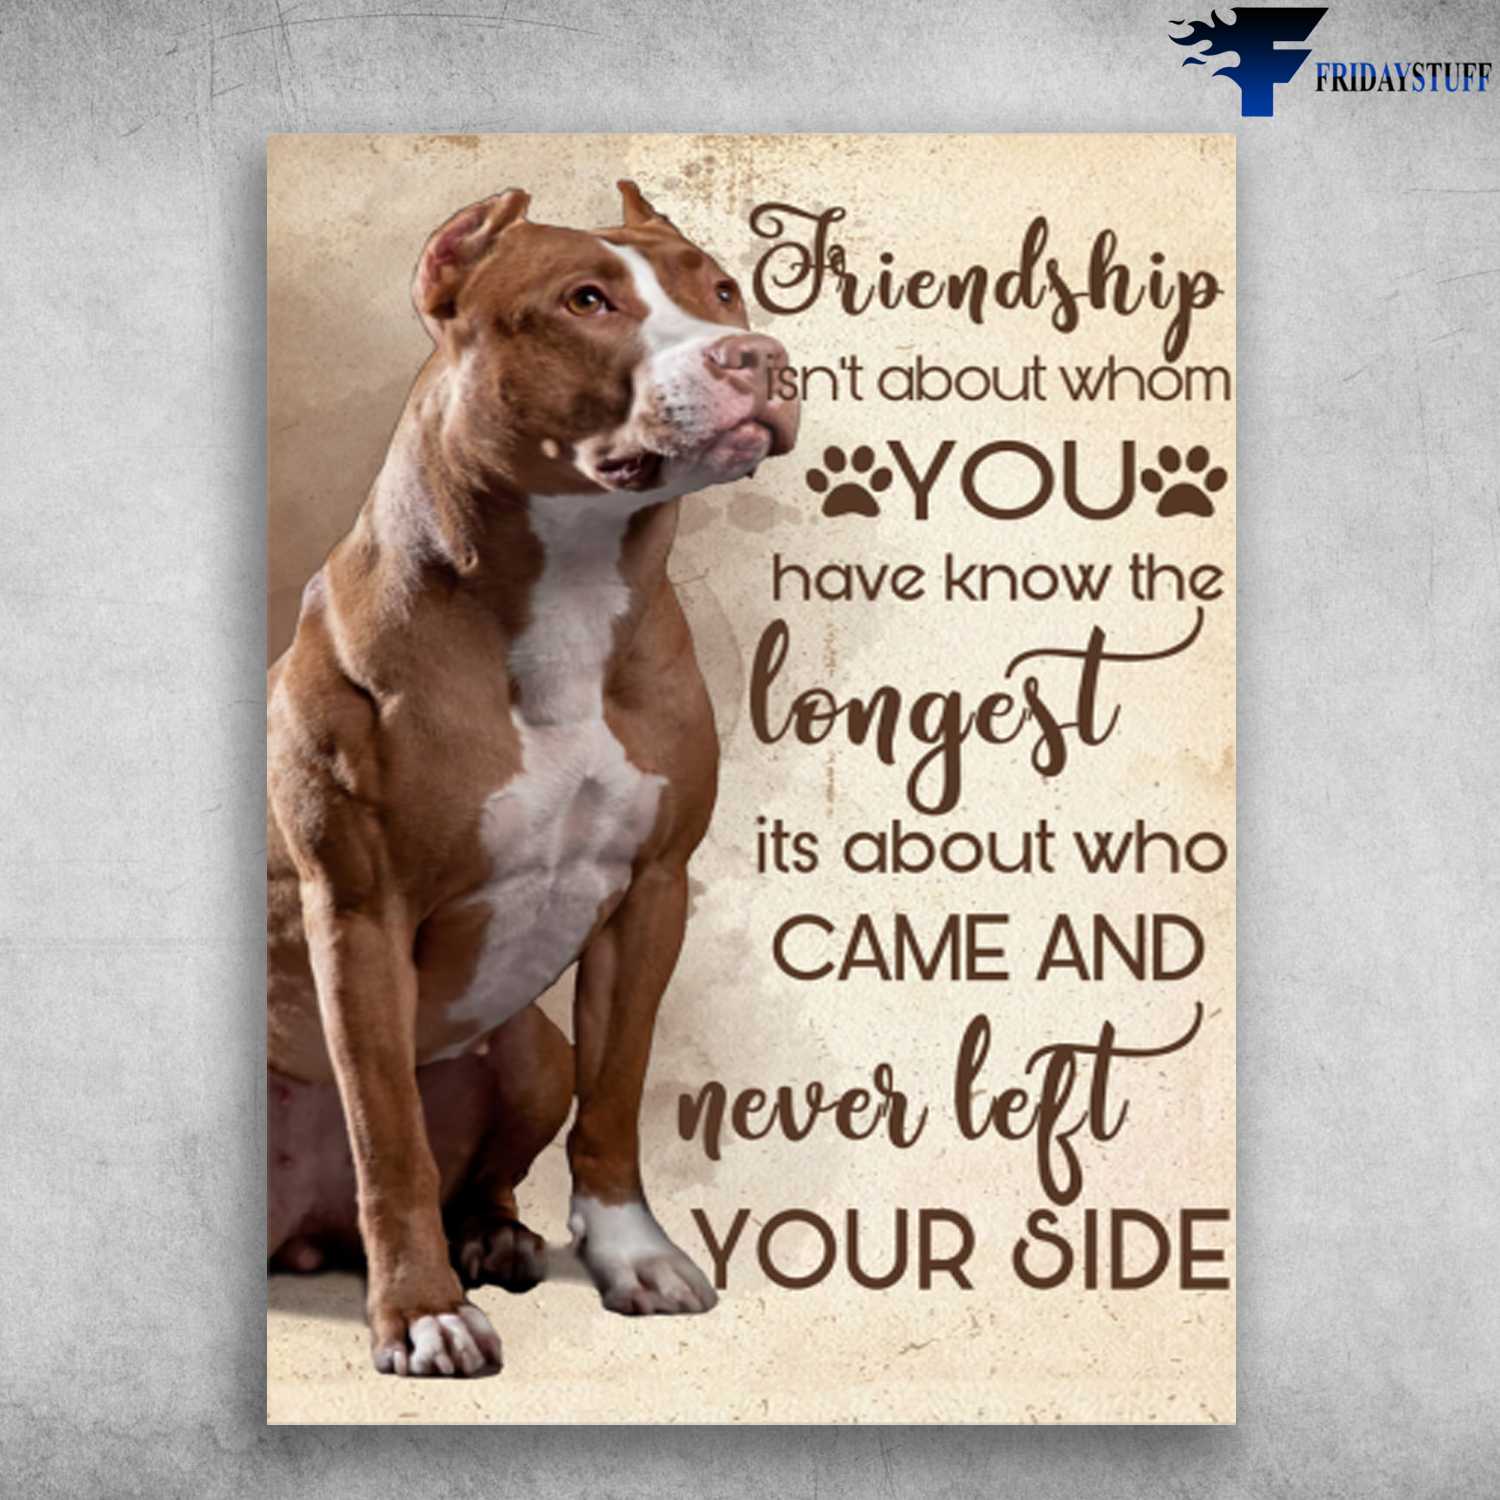 Pitbull Dog, Dog Lover - Friendship Isn't About, Whom You Have Know The Longest, Its About Who Came, And Never Left Your Side